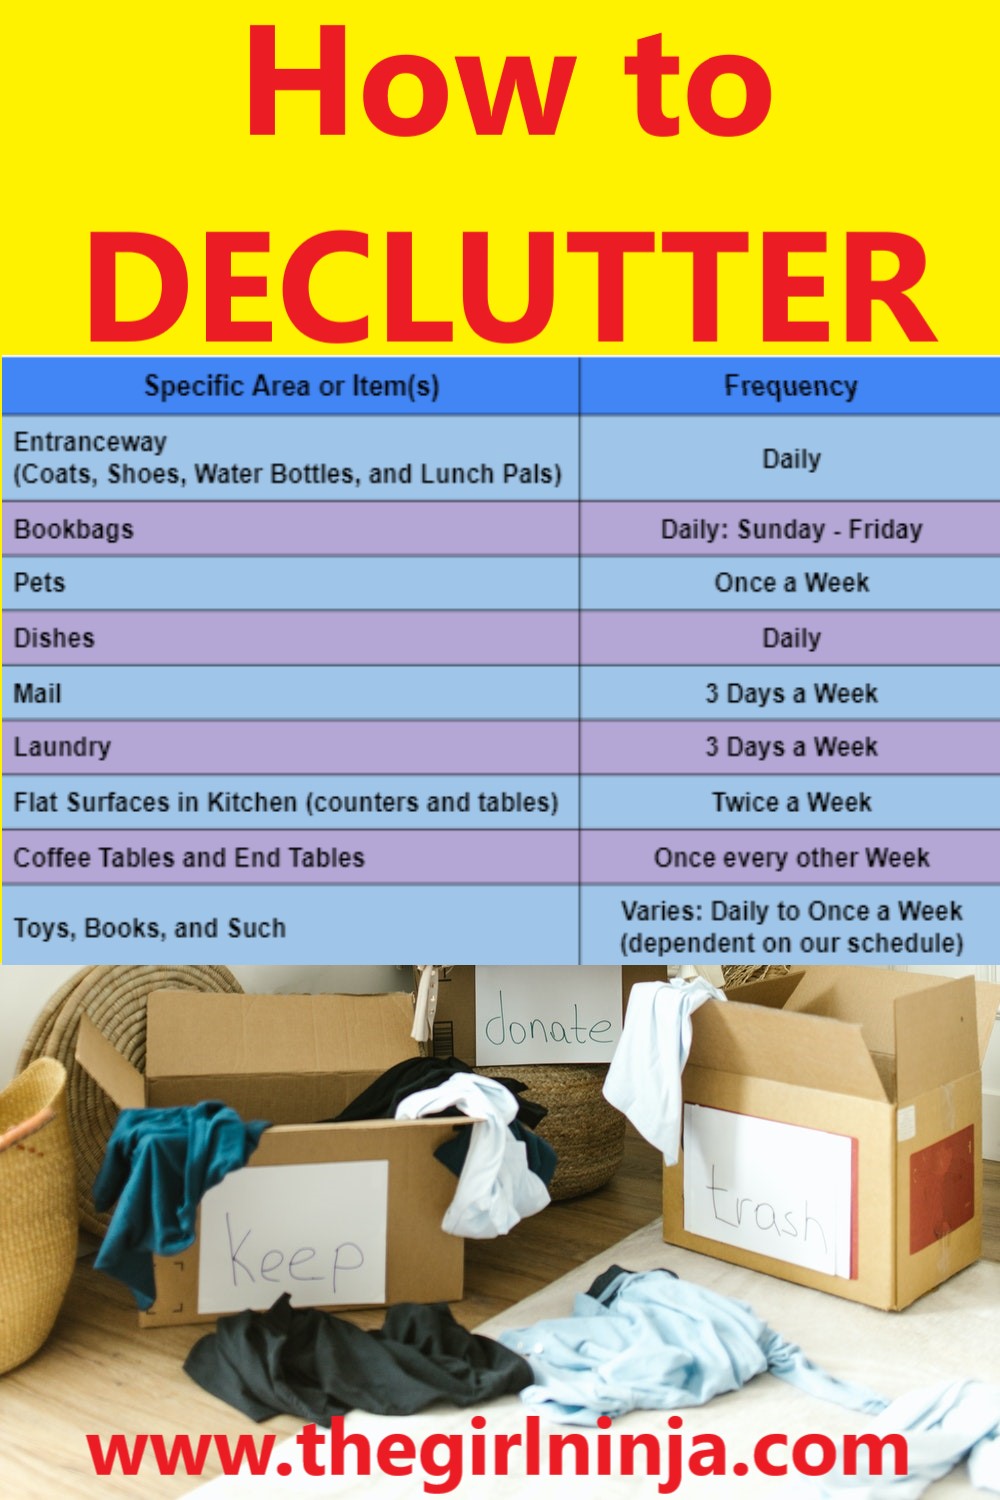 Red text against bright yellow background reads How to DECLUTTER, above a blue and purple table that lists specific area or item(s) and frequency. Below table clothing is thrown into boxes labeled Keep, donate, and trash. red text at the bottom center reads www.thegirlninja.com